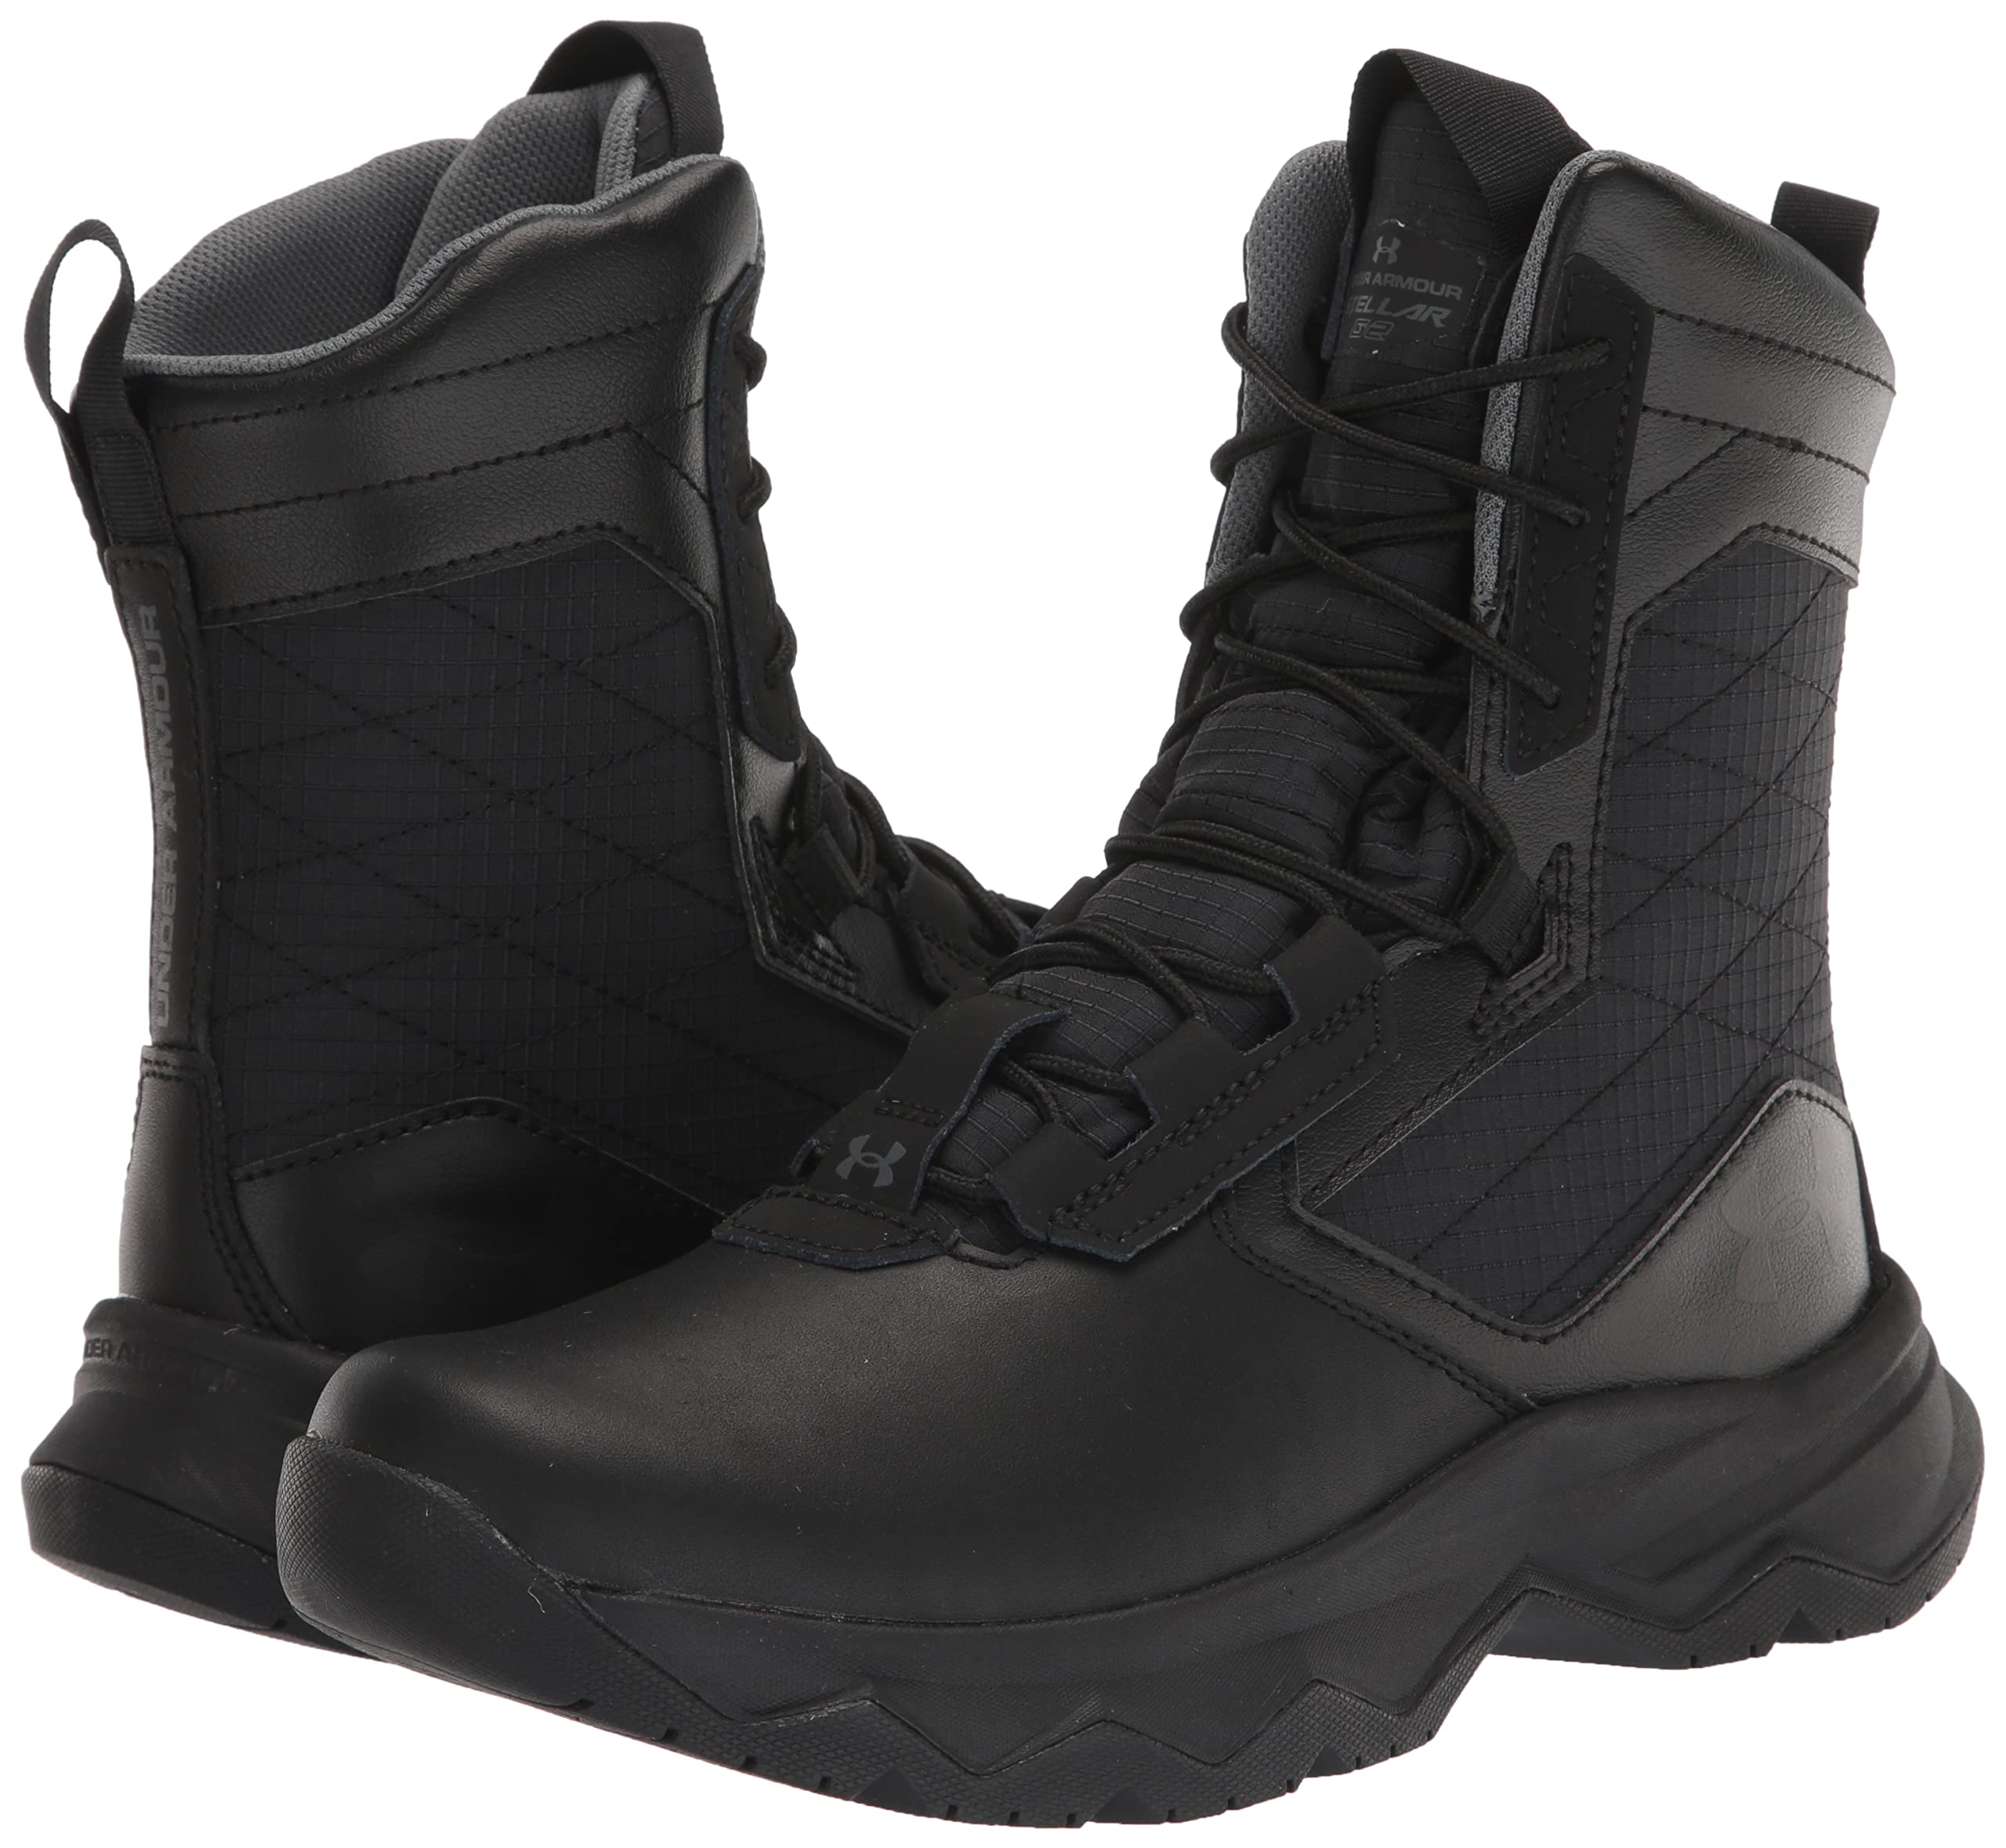 Under Armour Women's Stellar G2 Military and Tactical Boot